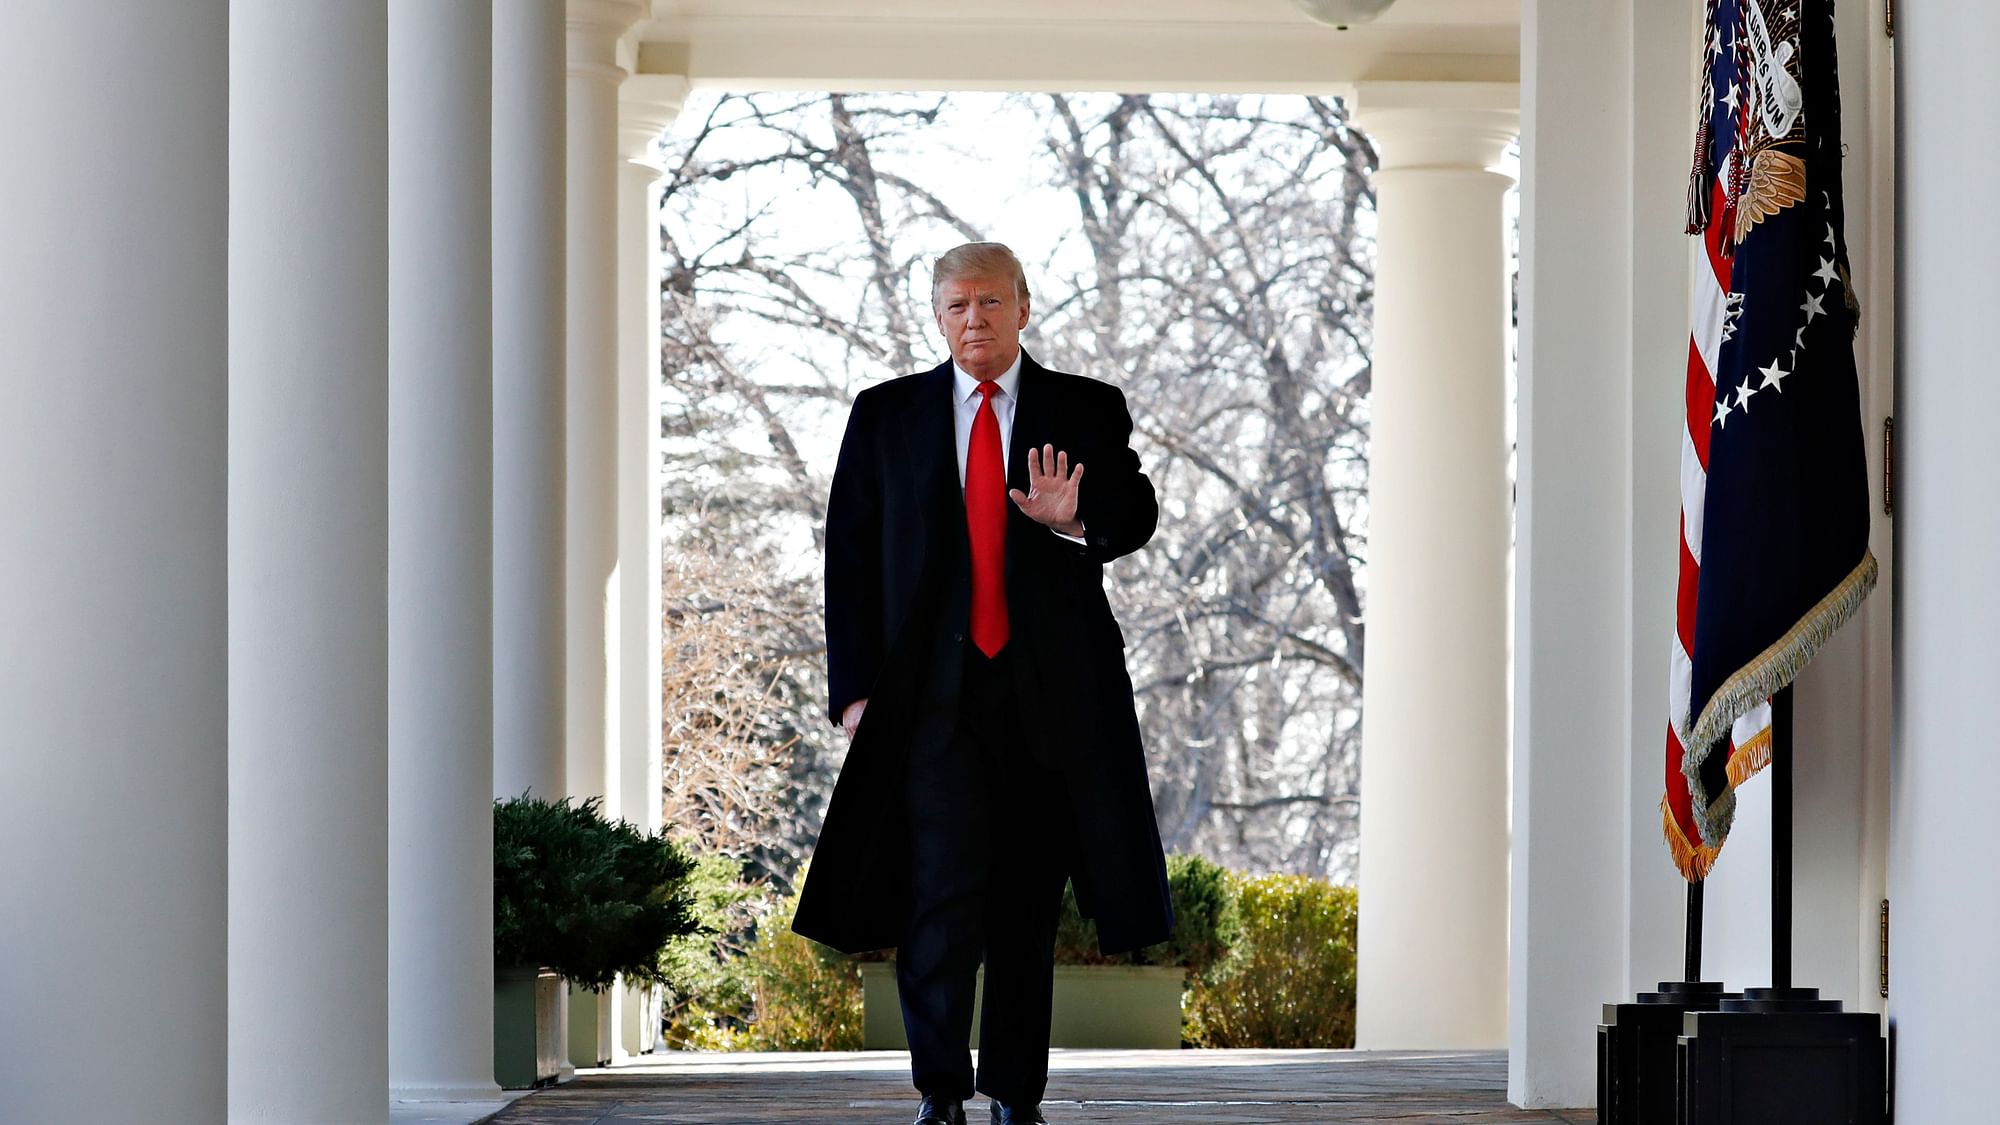 &nbsp; President Donald Trump waves as he walks through the Colonnade from the Oval Office of the White House on arrival to announce a deal to temporarily reopen the government